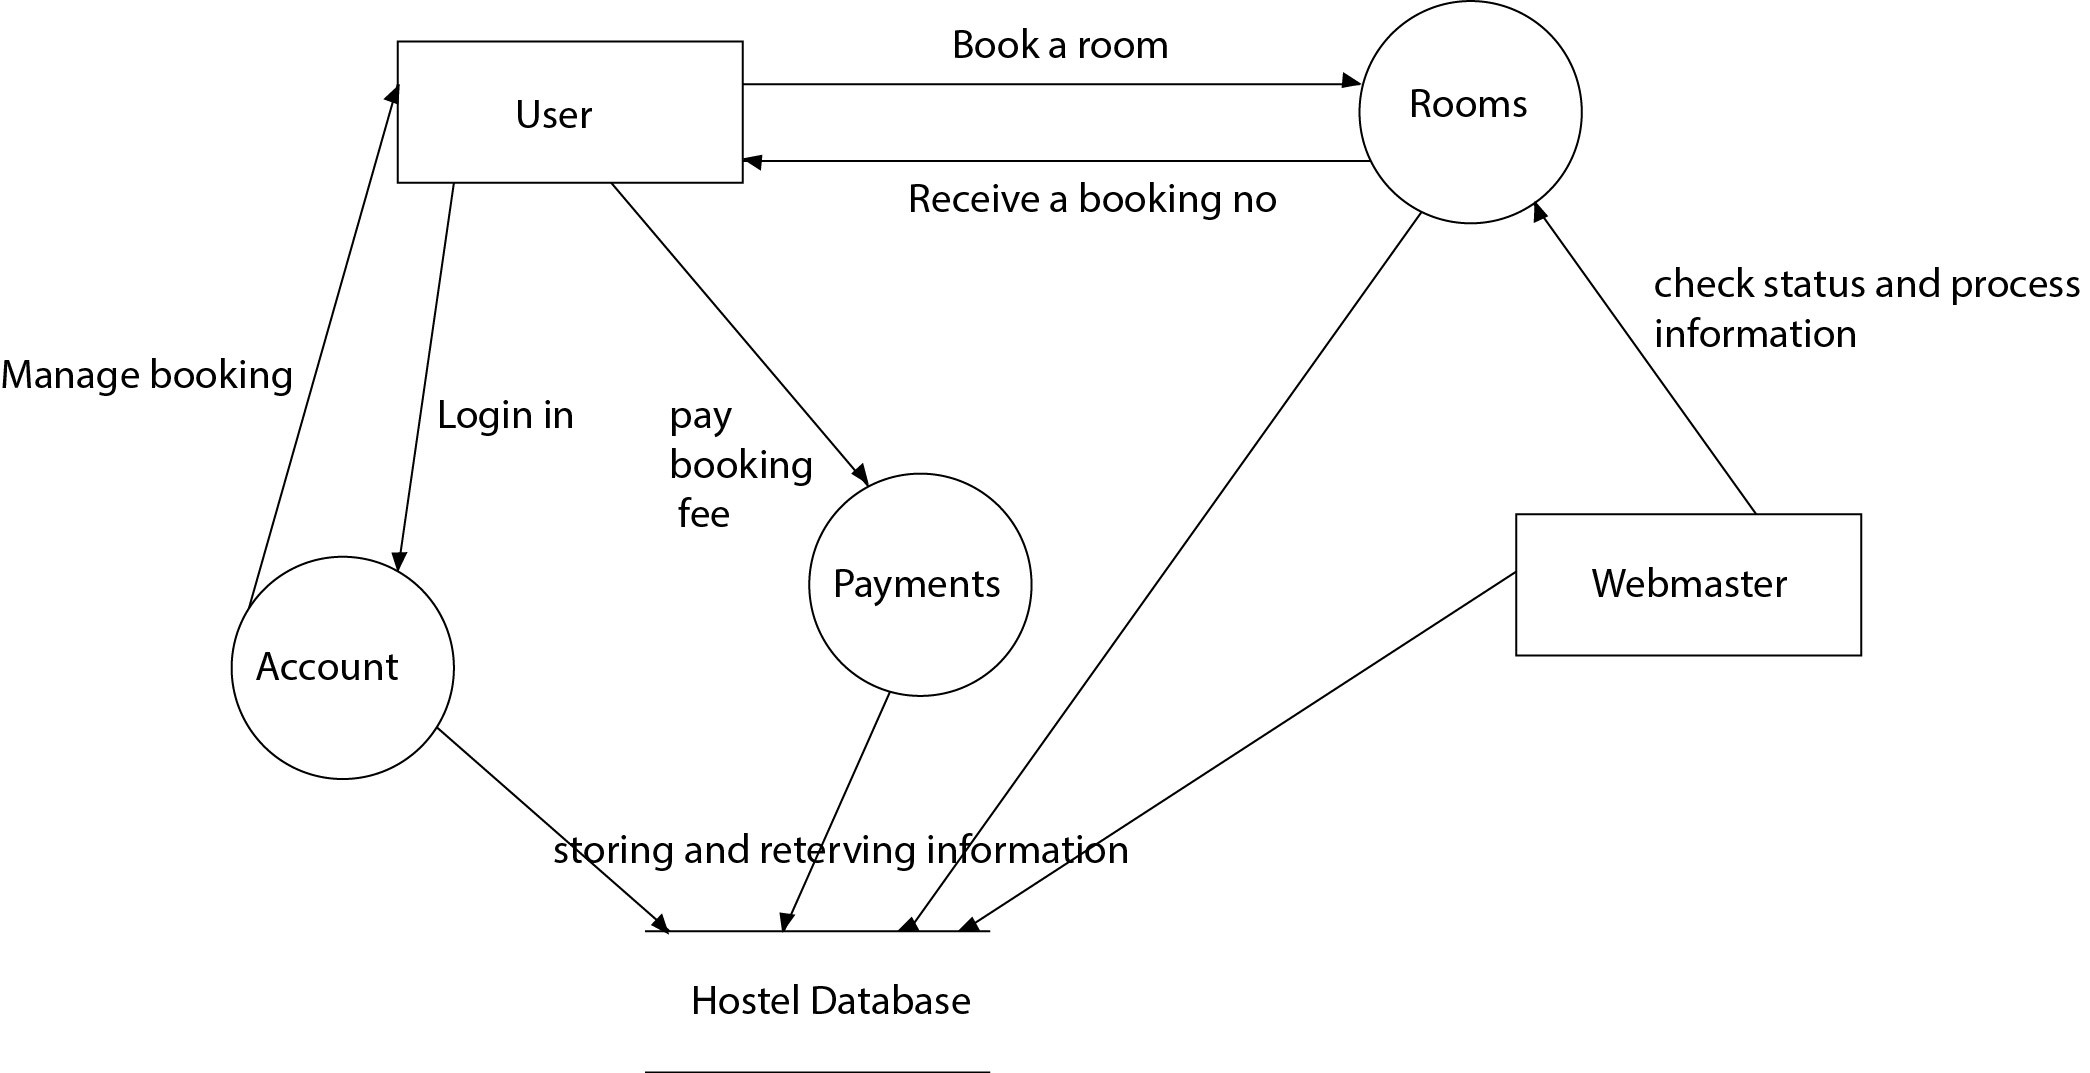 Need Help In Dfd Diagram For Online Hotel Booking System regarding Er Diagram For Hotel Reservation System